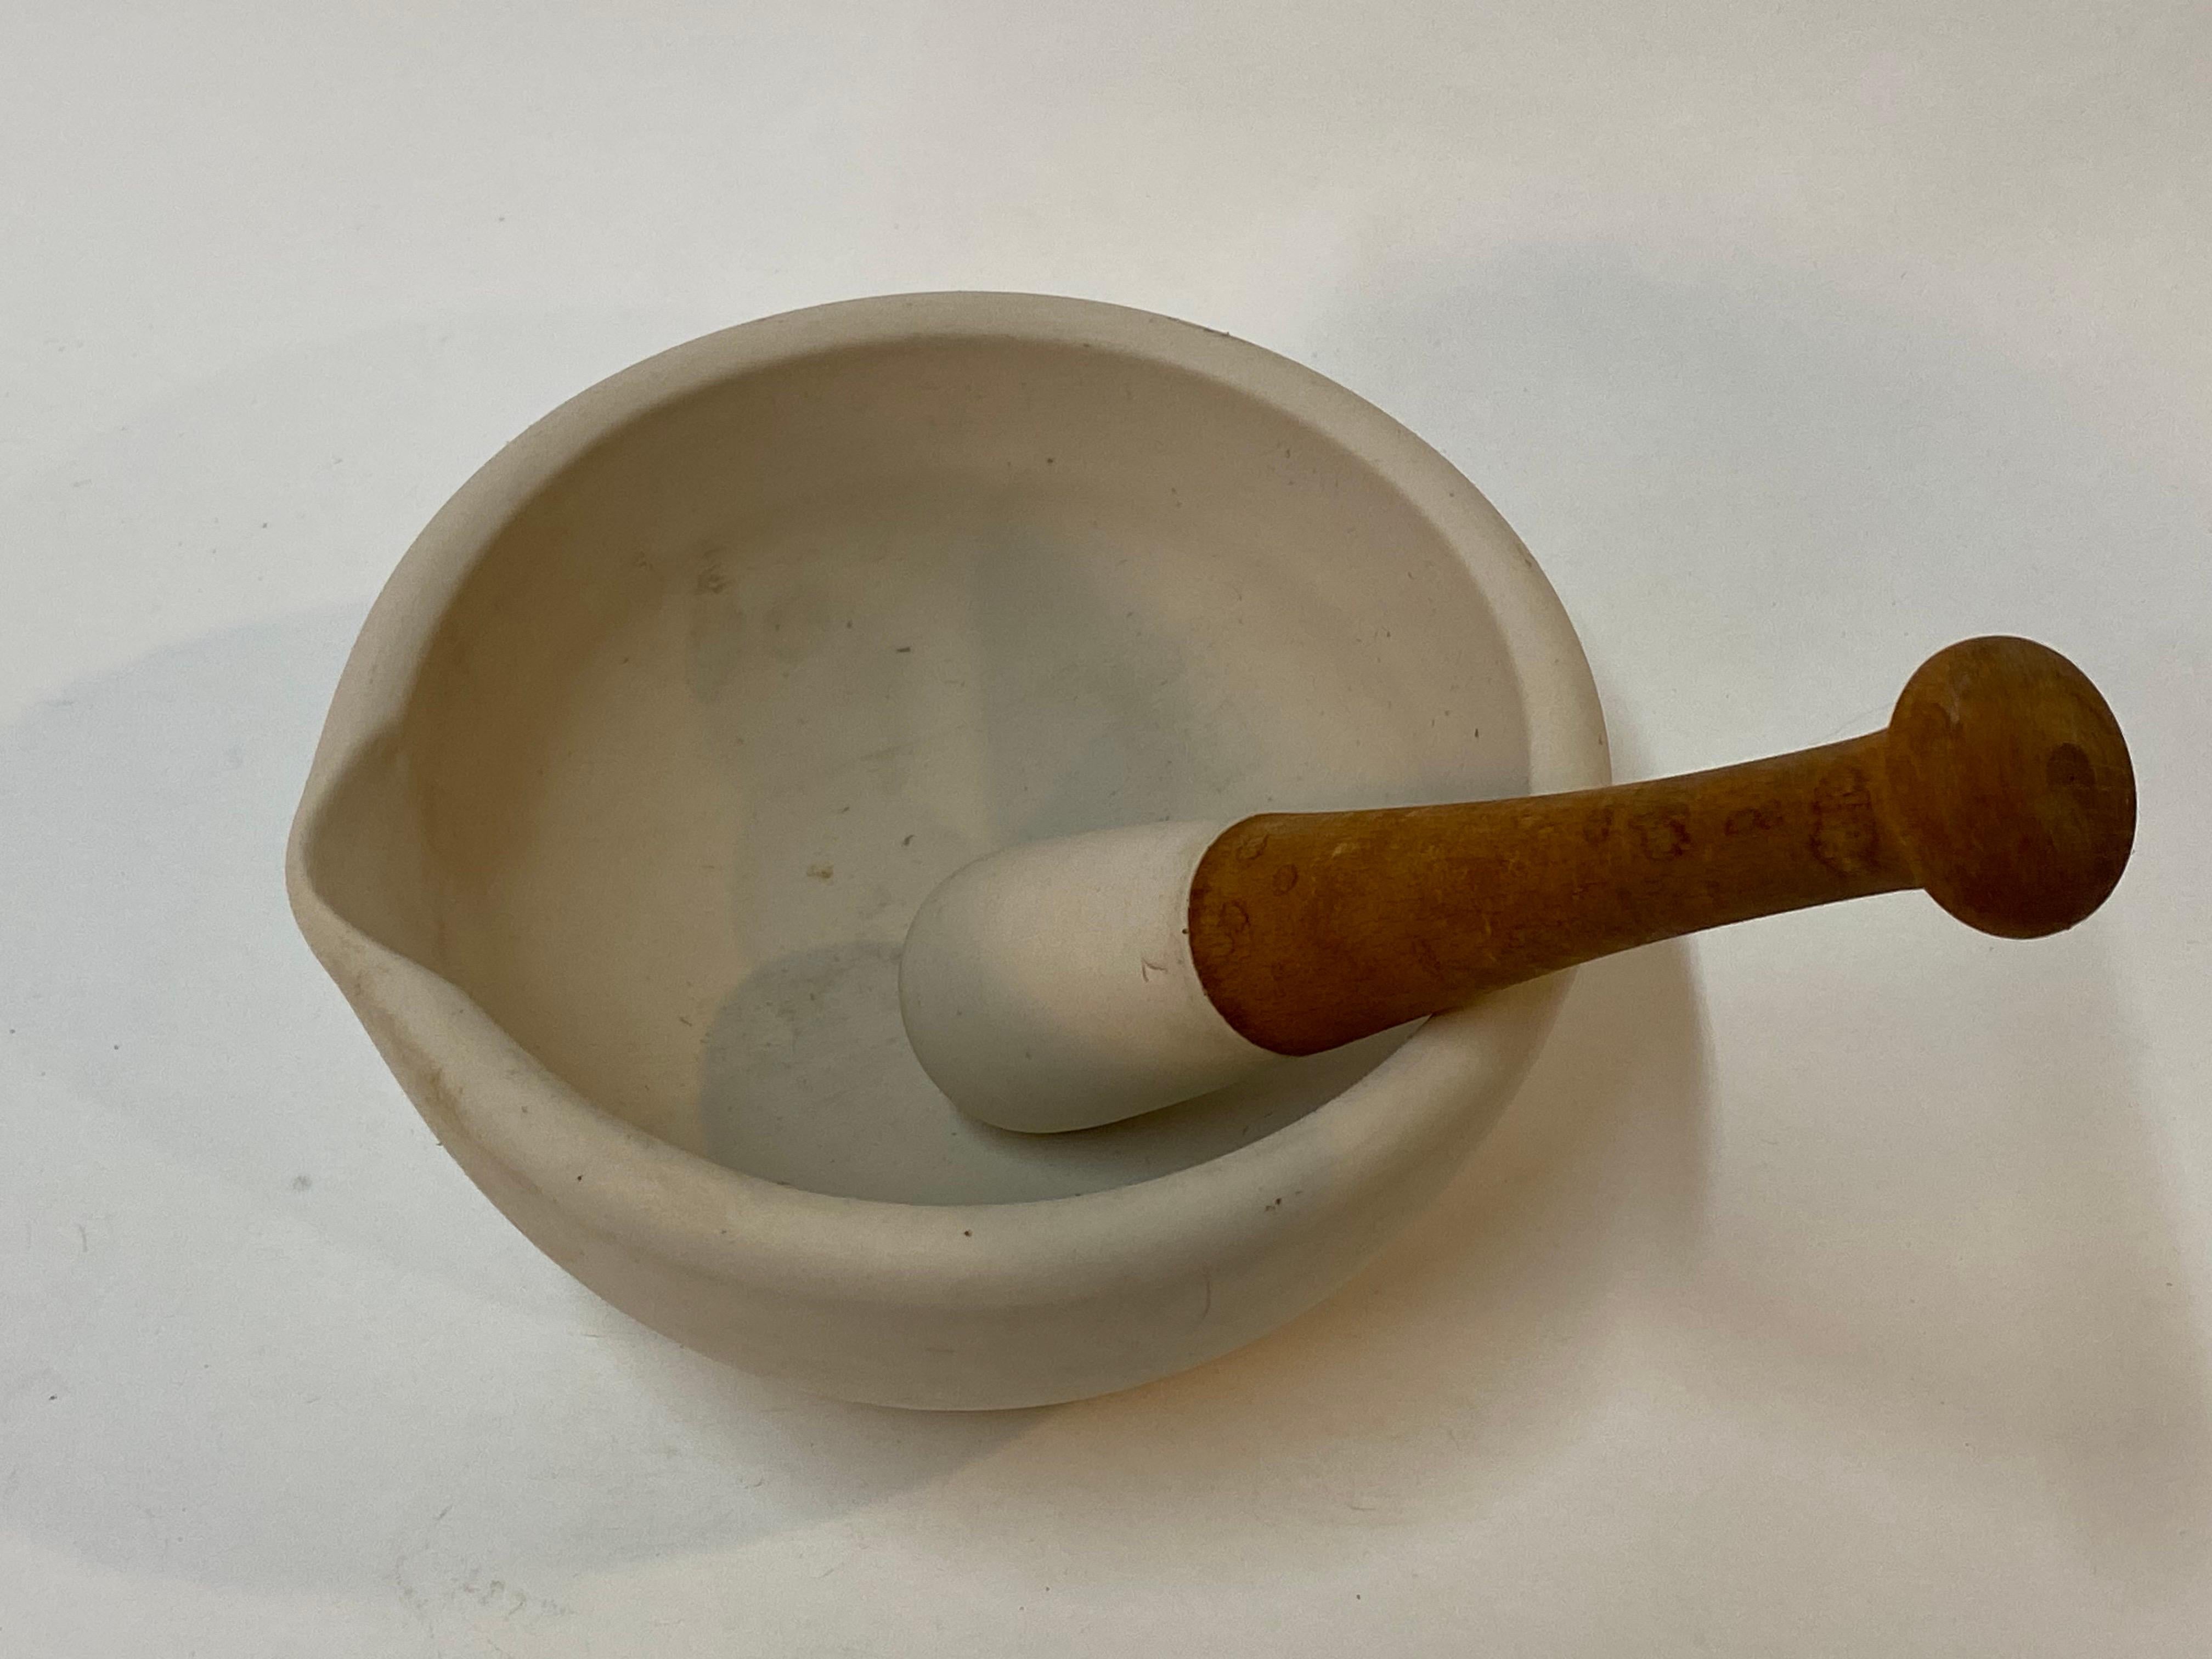 Molded English Porcelain Mortar and Pestle #7 For Sale